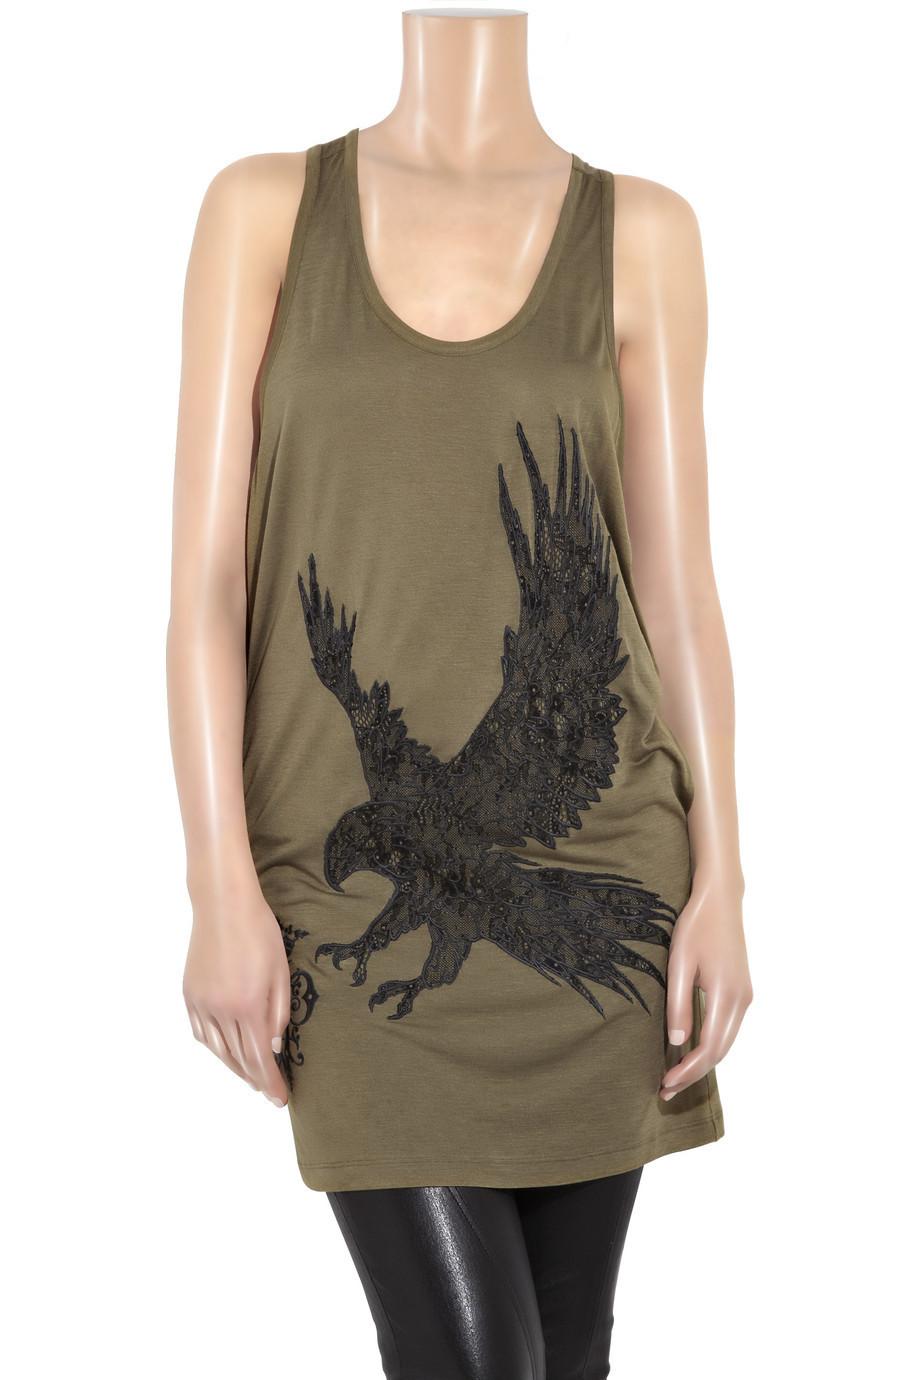 UNWORN Emilio Pucci by Peter Dundas Embroidered Eagle Dress Tunic 40  For Sale 1